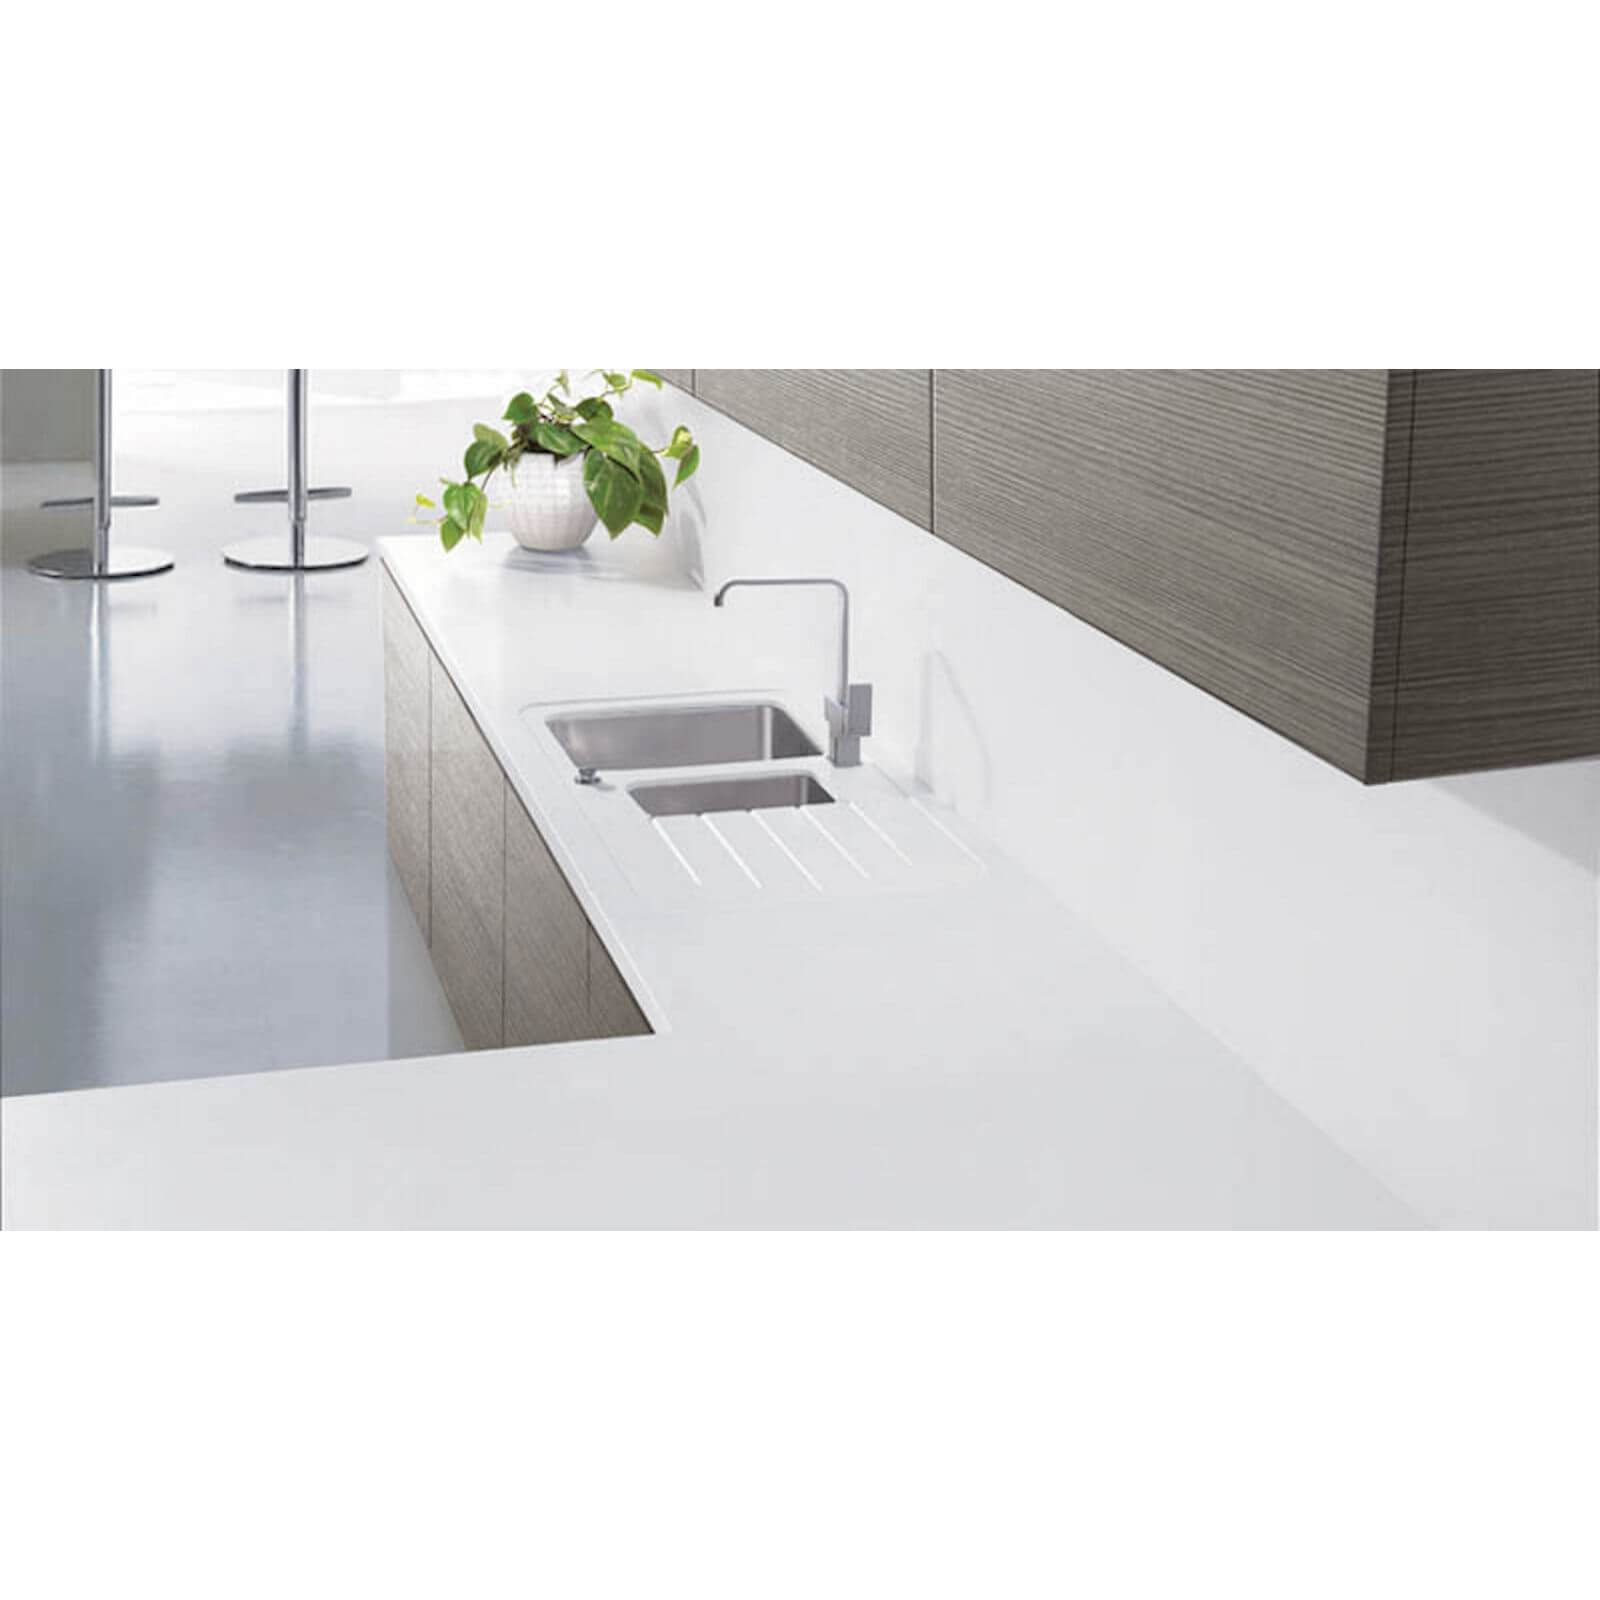 Maia Cristallo Kitchen Sink Worktop - Acrylic Super Large Right Hand Bowl - 3600 x 650 x 42mm